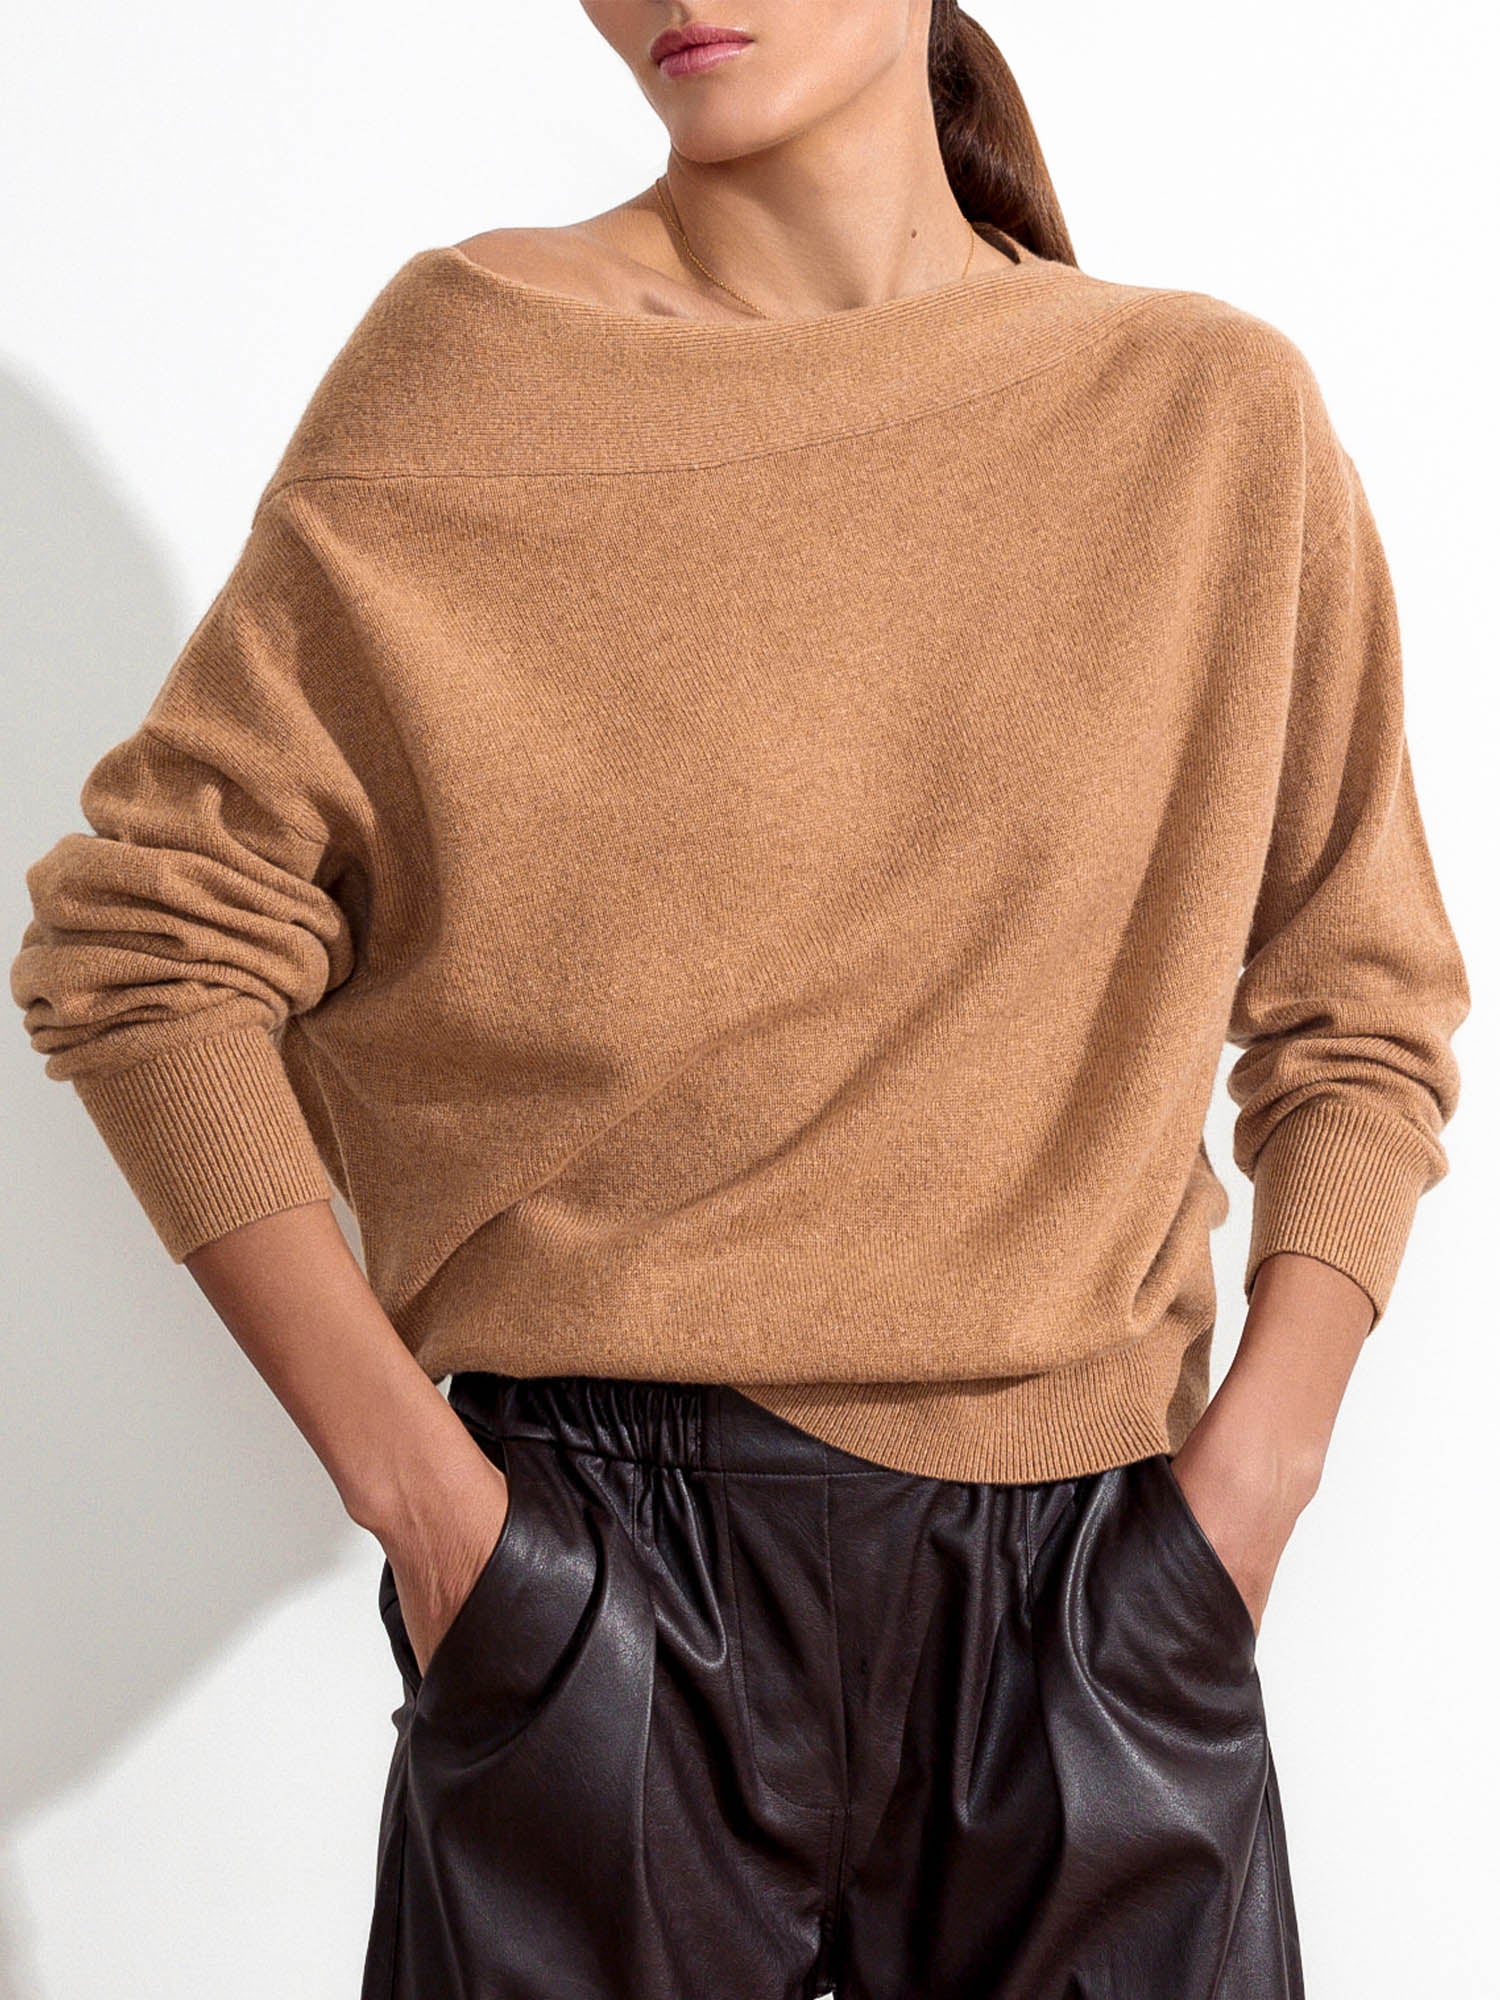 Dunne cashmere boatneck tan sweater front view 2